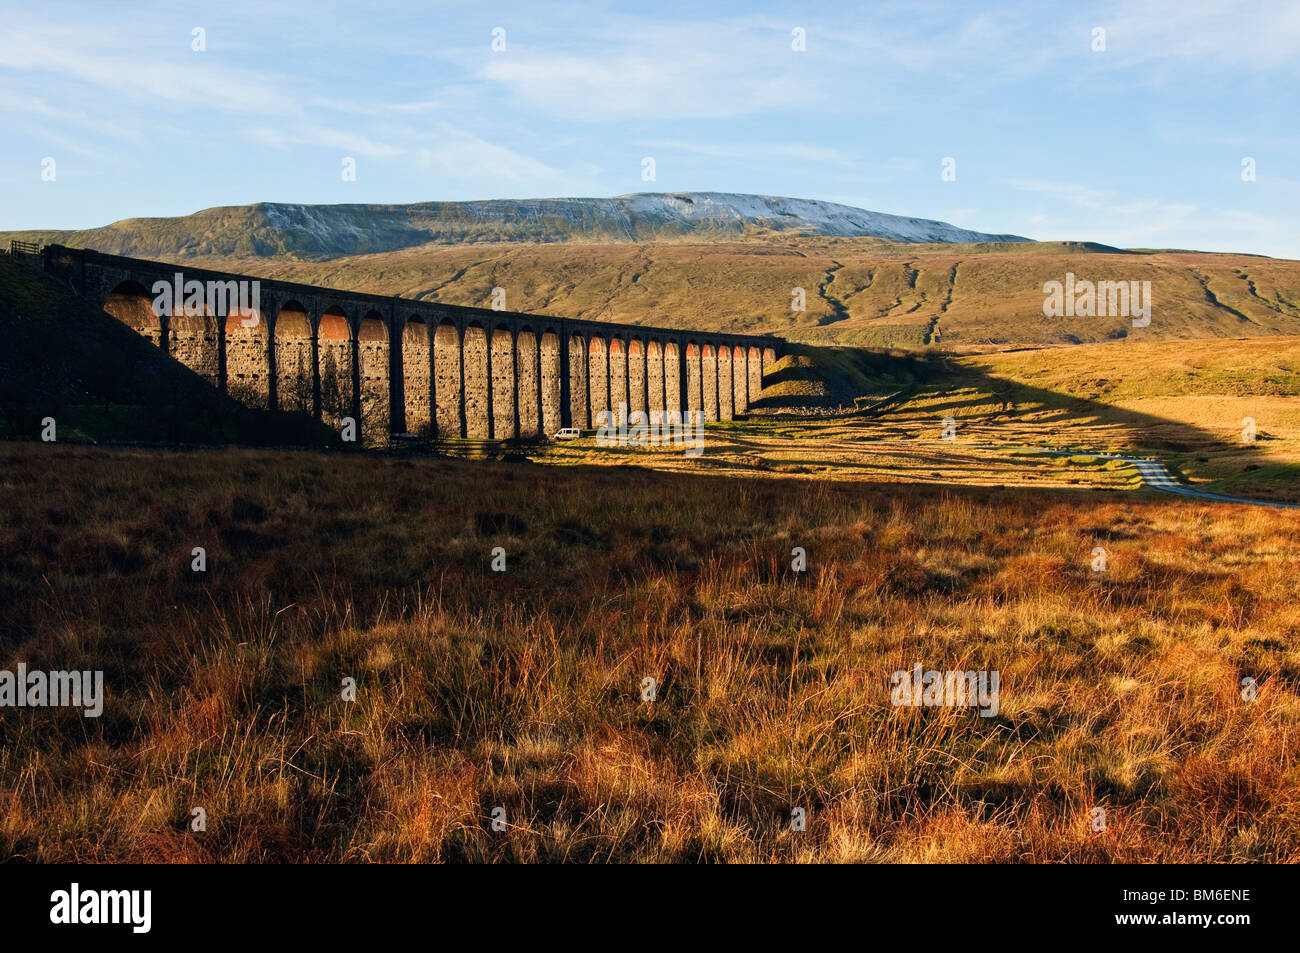 The Ribblehead Viaduct on the Settle-Carlisle railway line in the Yorkshire Dales National Park, England Stock Photo